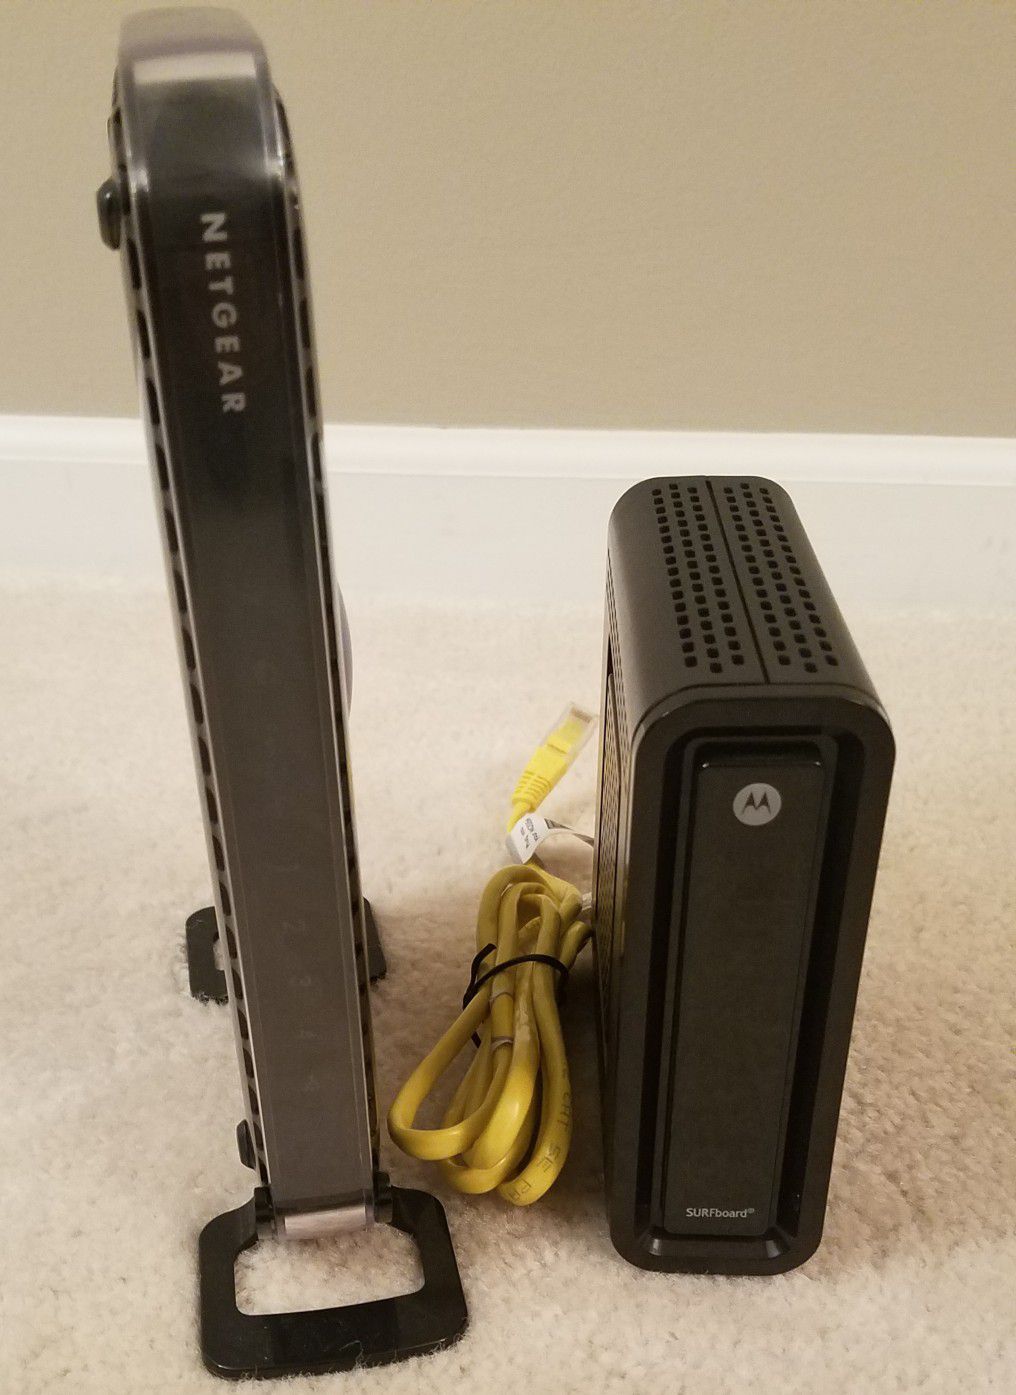 Motorola SB6121 cable modem and Netgear N600 WiFI Router